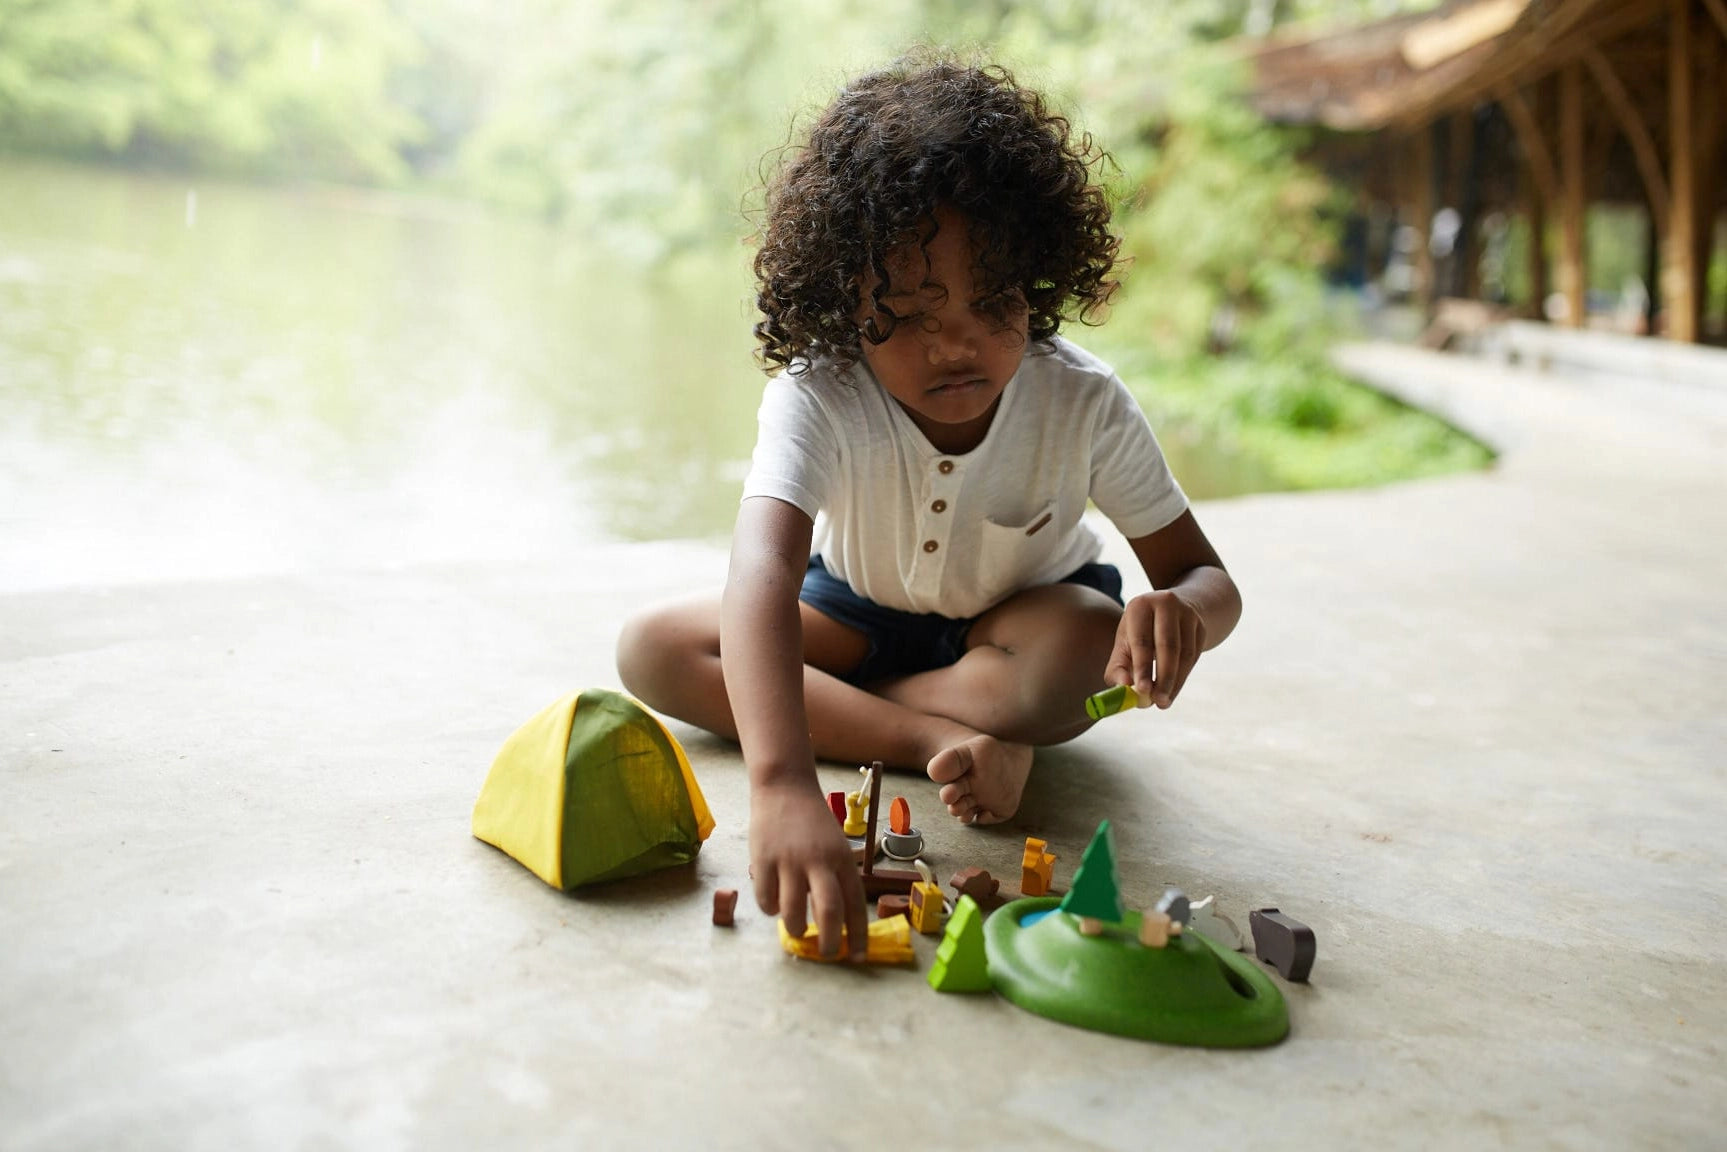 Camping Set - Sustainably Made Toy